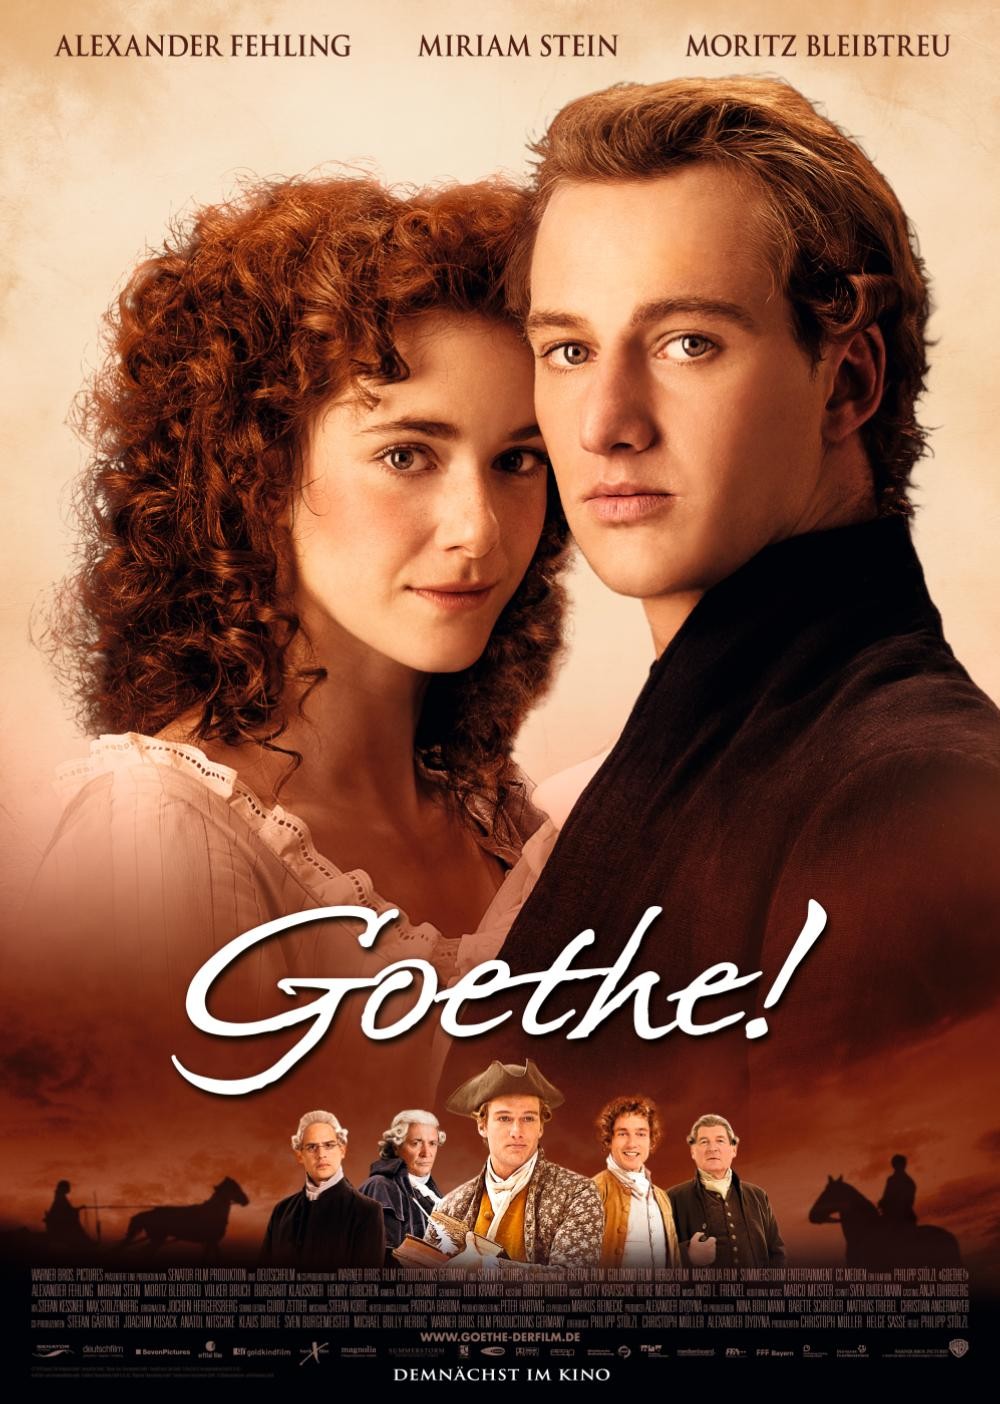 Extra Large Movie Poster Image for Goethe! (#1 of 2)